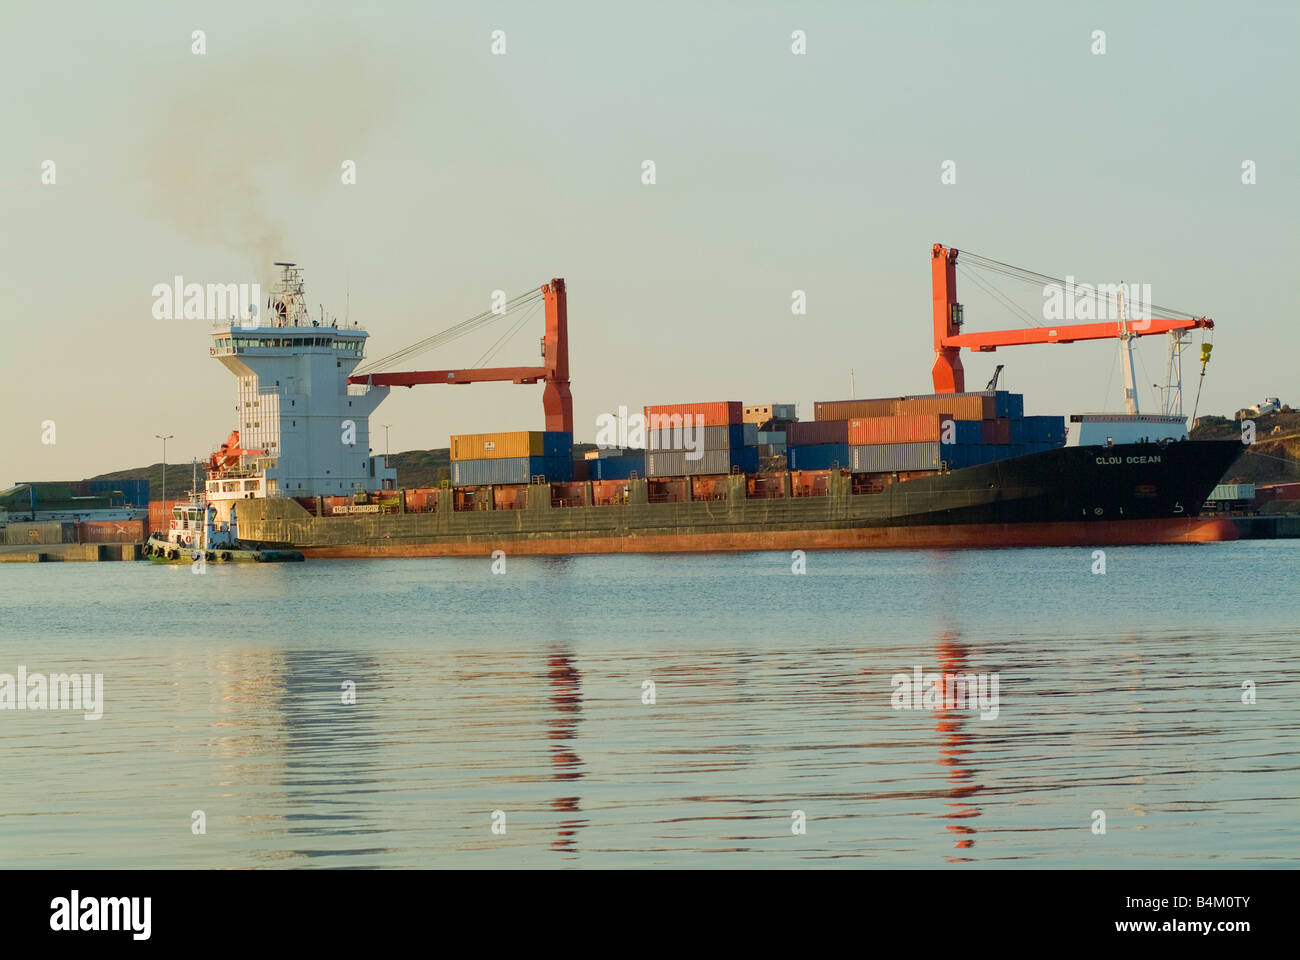 The Container Ship Clou Ocean Docking at Lavrion Harbour on the Greek Mainland in Early Morning Sunshine Stock Photo